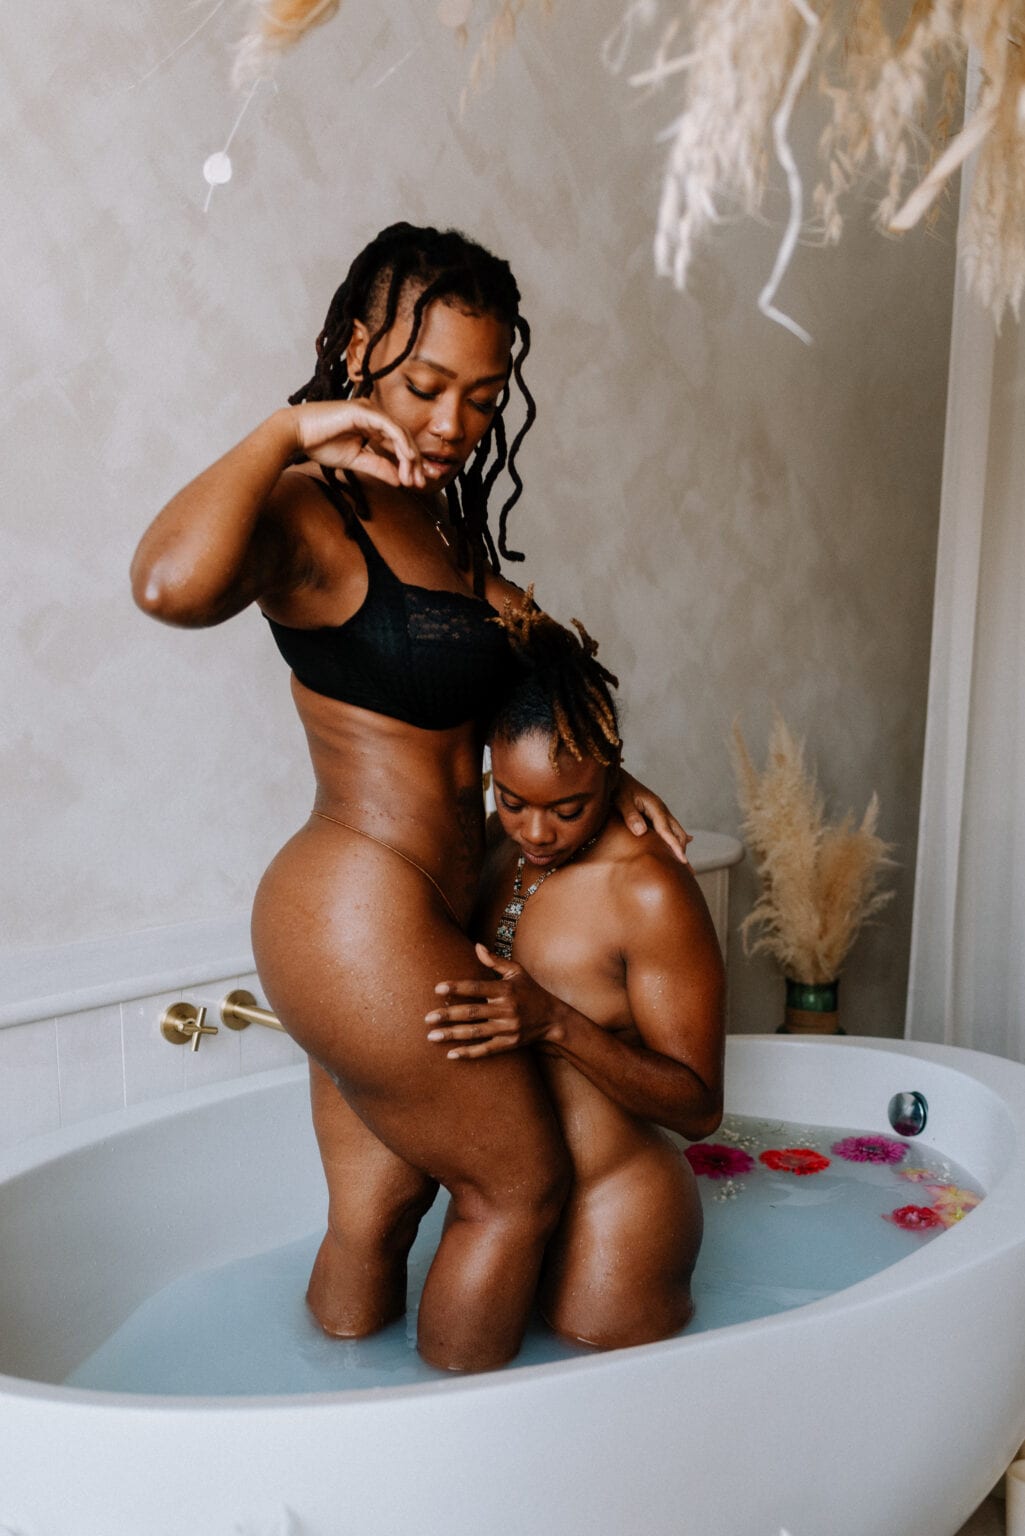 Lesbian couple taking a bath together in a bath of milk and flowers in natural light. 